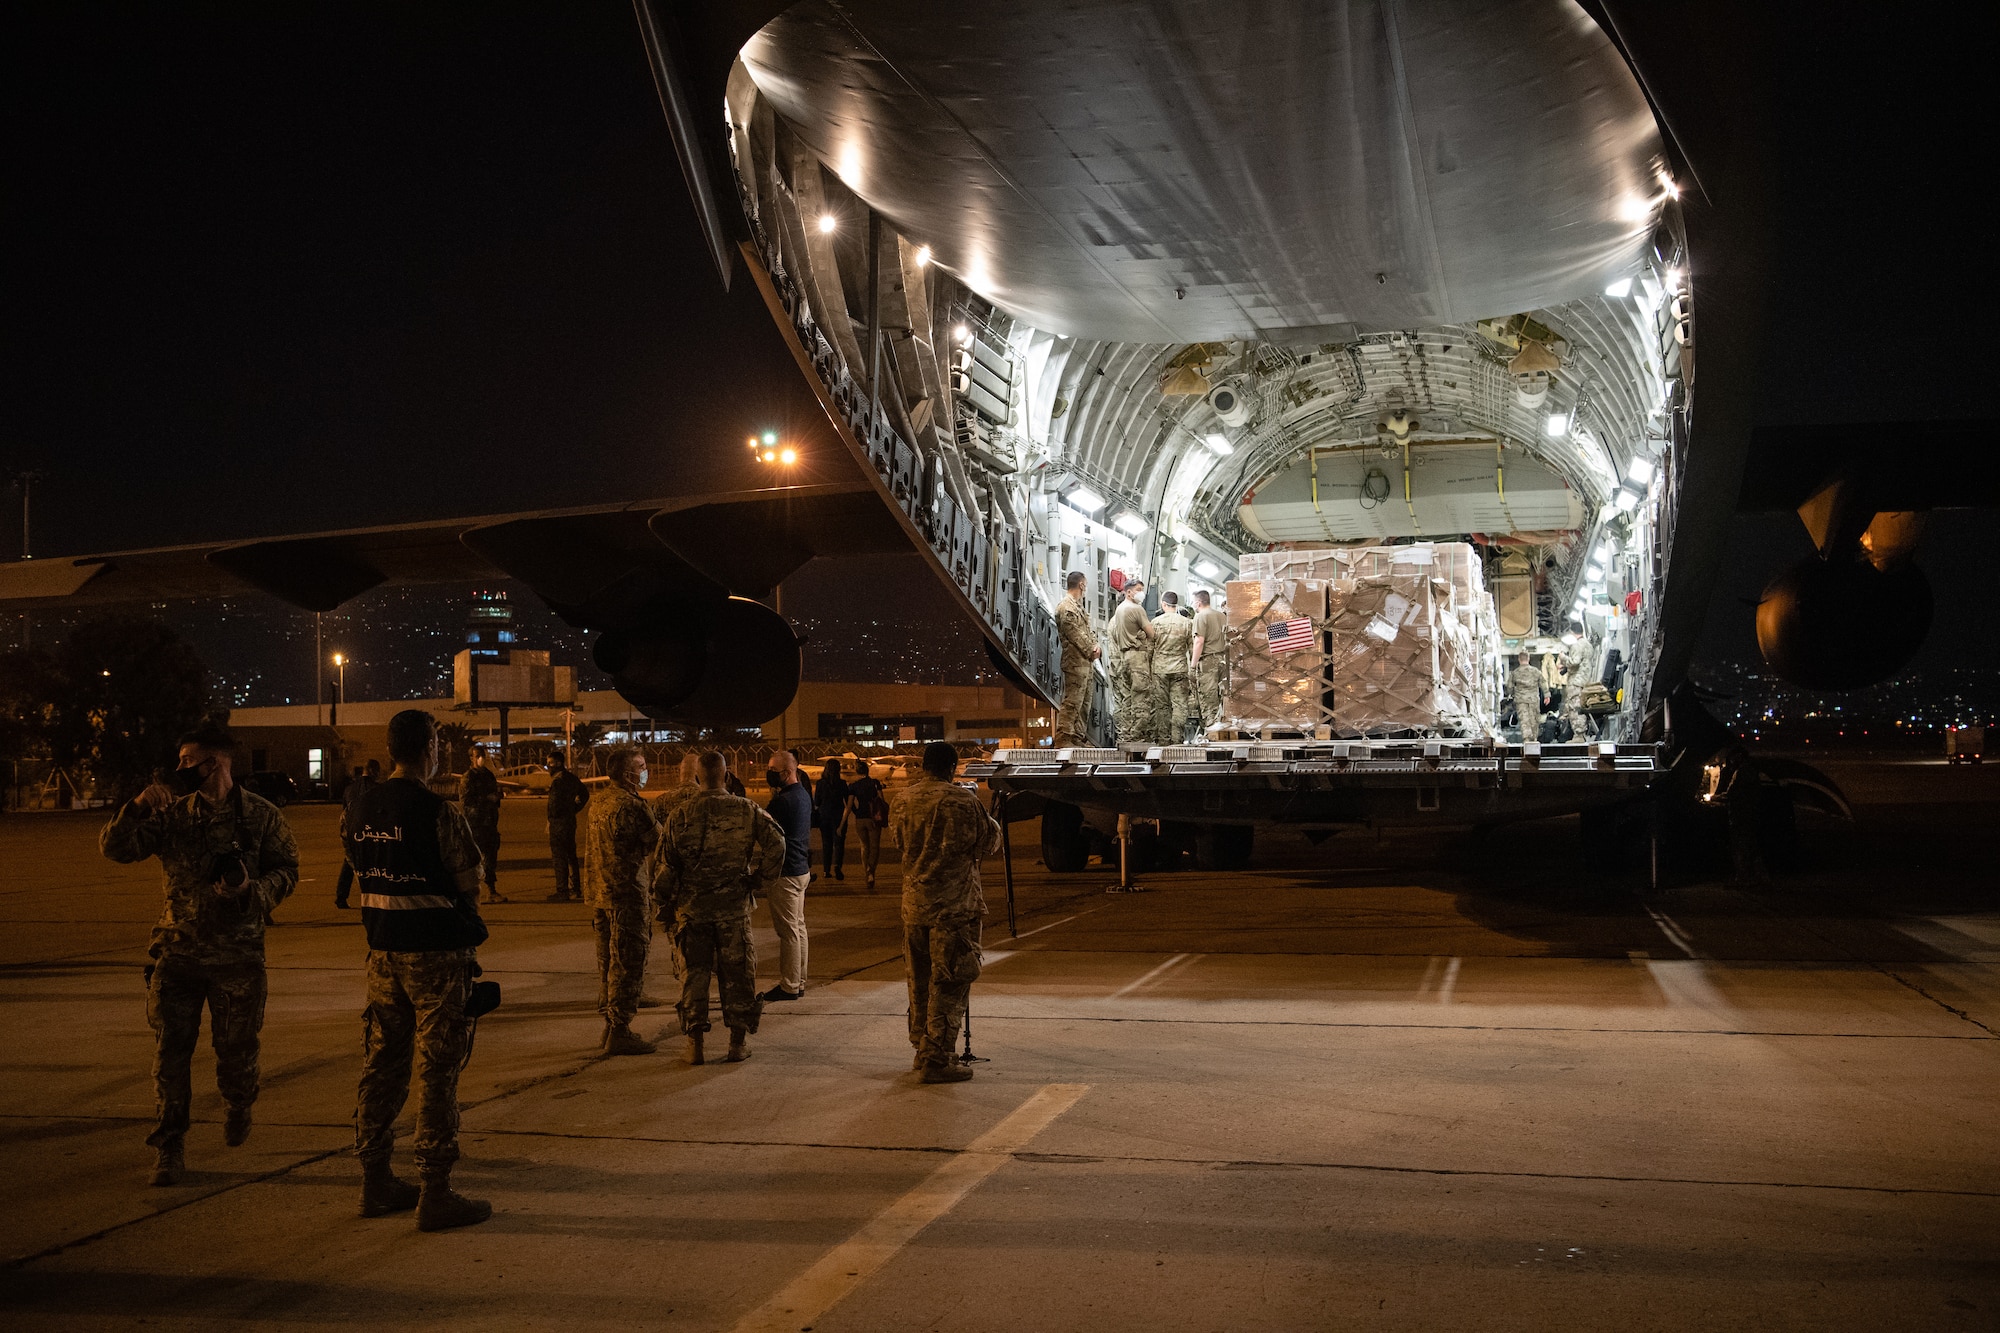 U.S. Central Command is coordinating with the Lebanese Armed Forces and U.S. Embassy-Beirut to transport critical supplies as quickly as possible to support the needs of the Lebanese people.